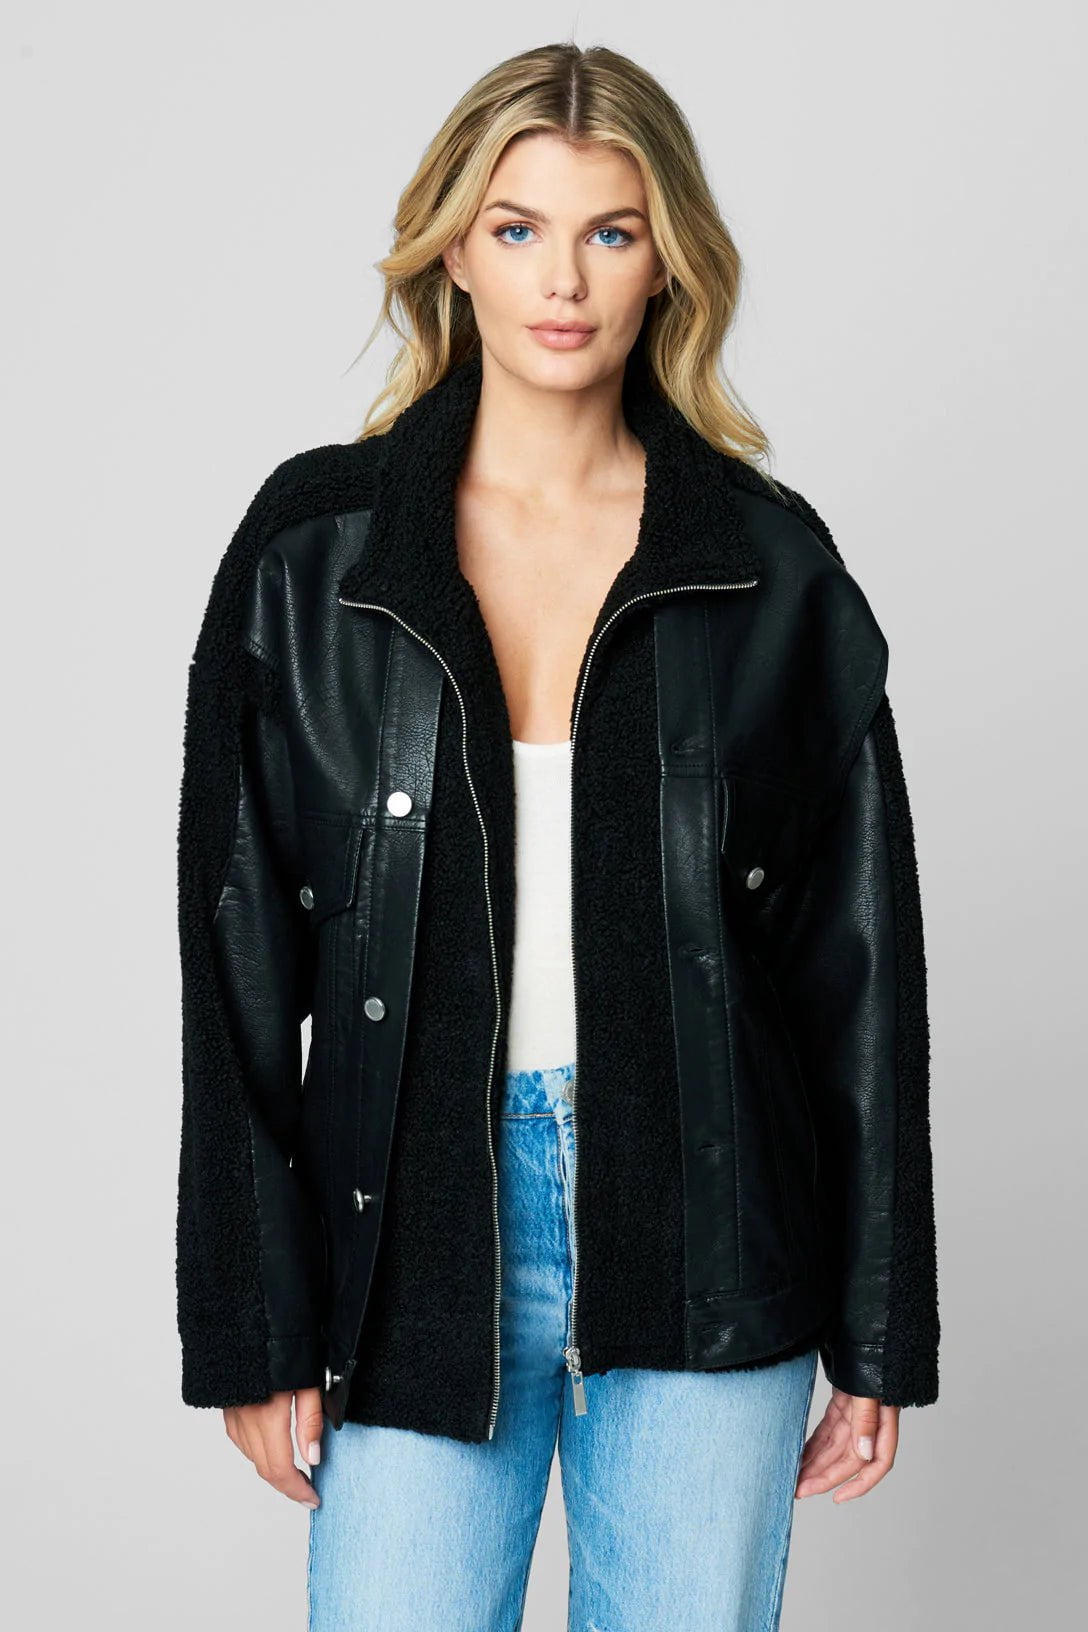 Edge to Edge Leather Sherpa Jacket Black, Jacket by Blank NYC | LIT Boutique